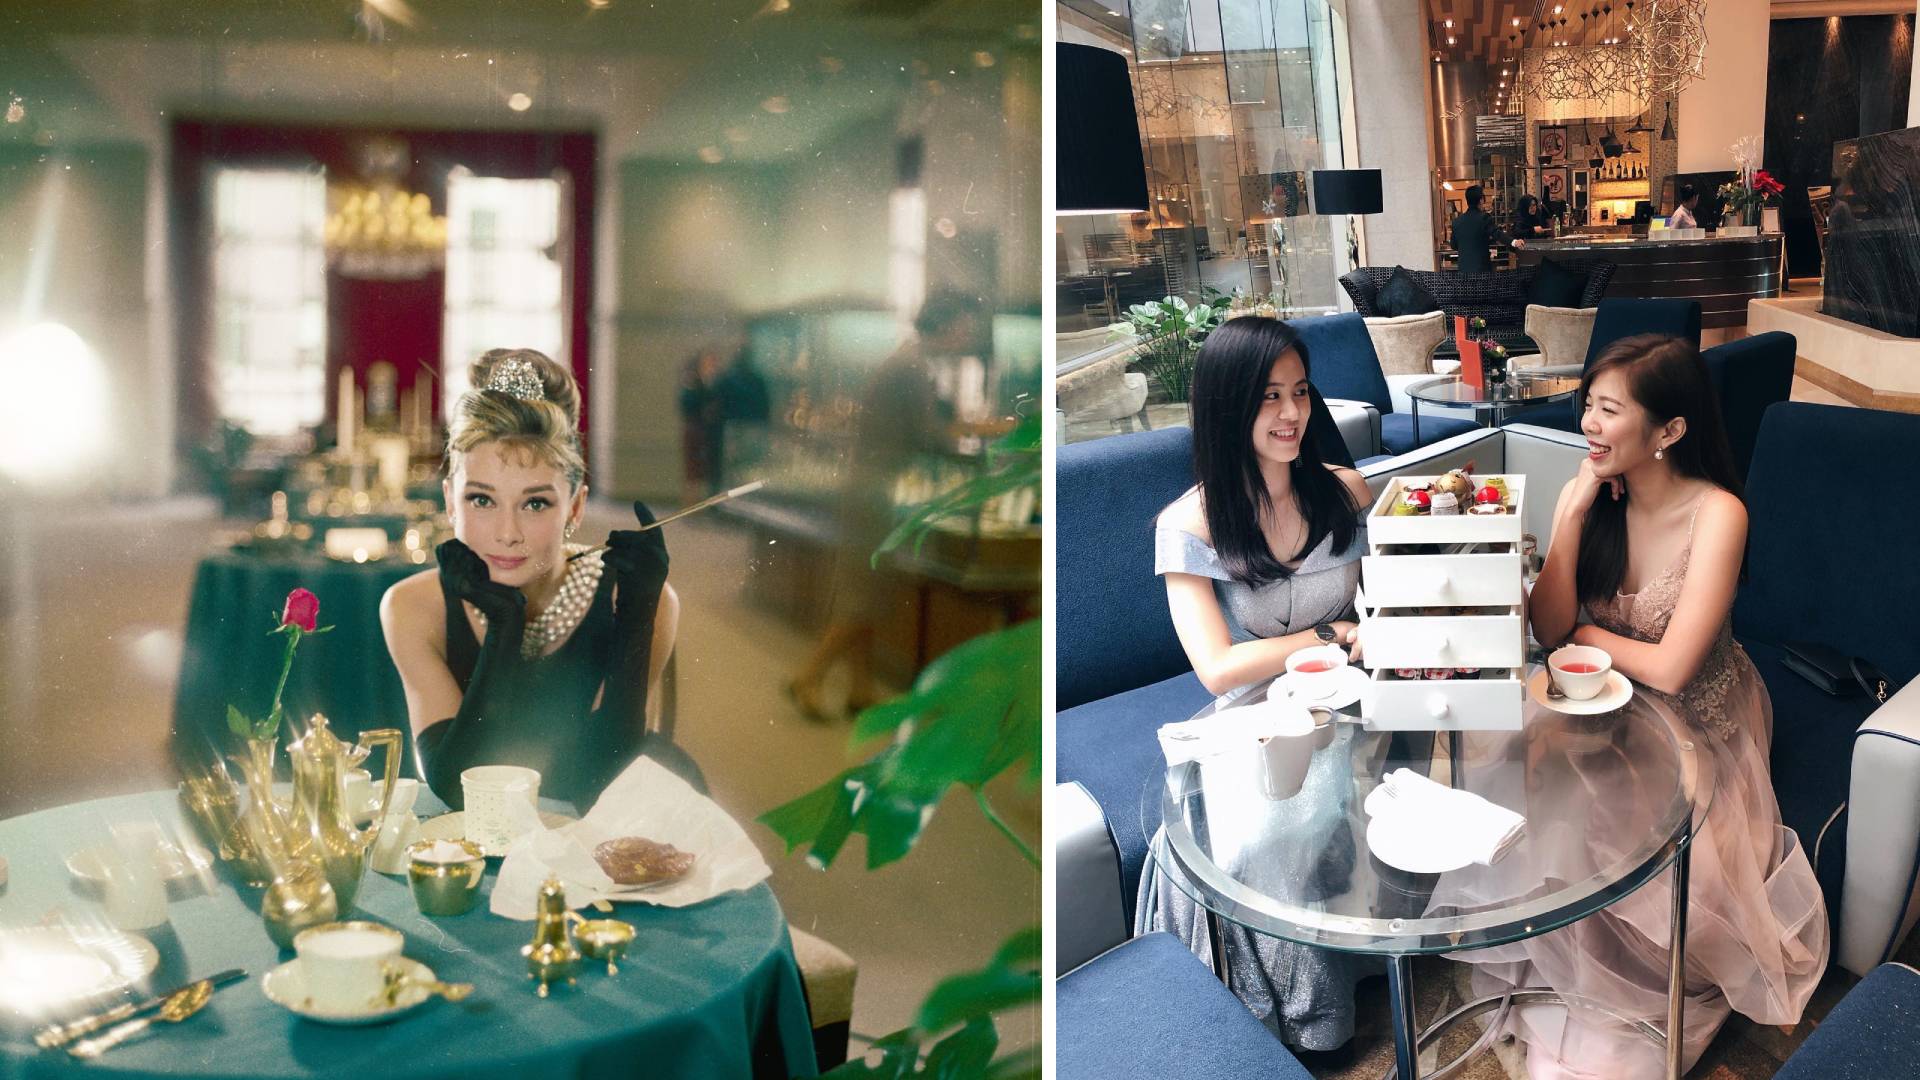 Kate Spade Afternoon Tea at The Writers Bar - Breakfast at Tiffany's feels